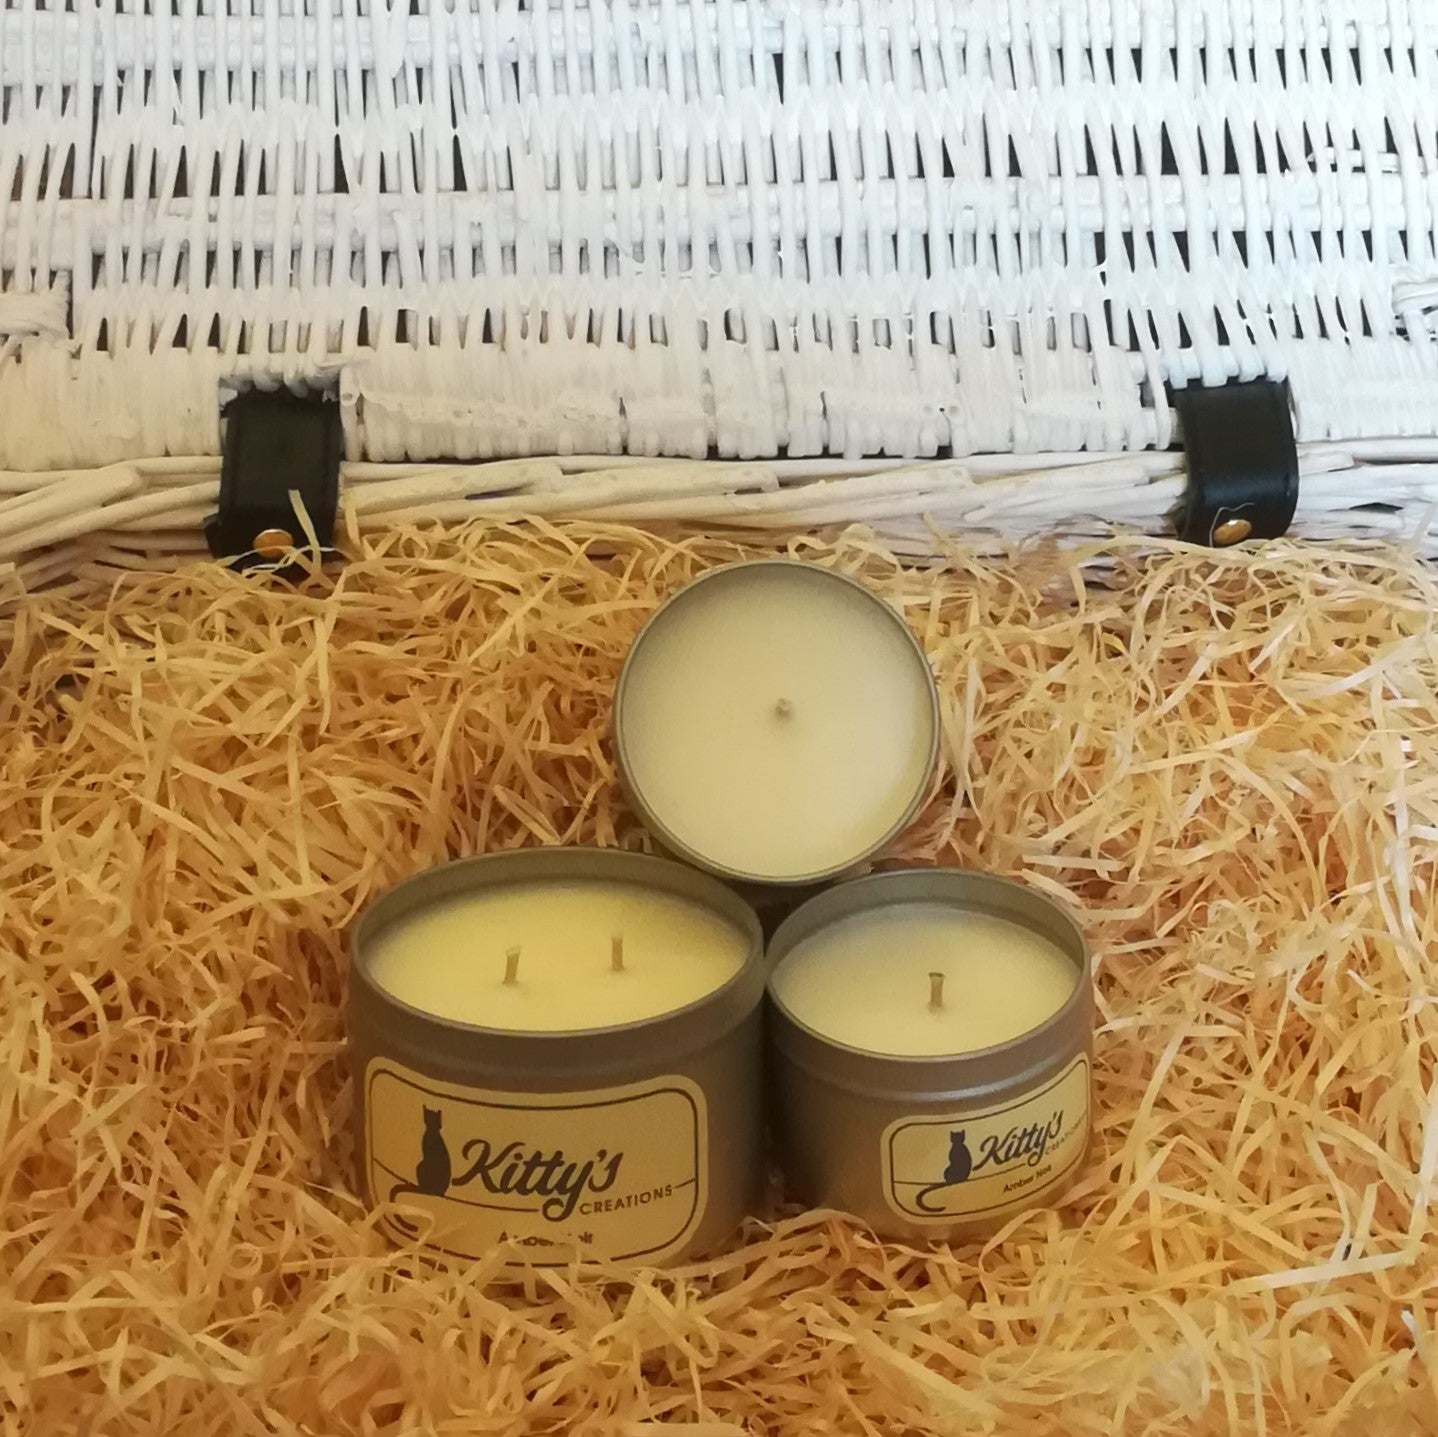 Three hand poured candles filled with amber noir scented soy wax, contained in travel tins with clear see through lids ready for you to take on your next adventure whether for work or pleasure. 